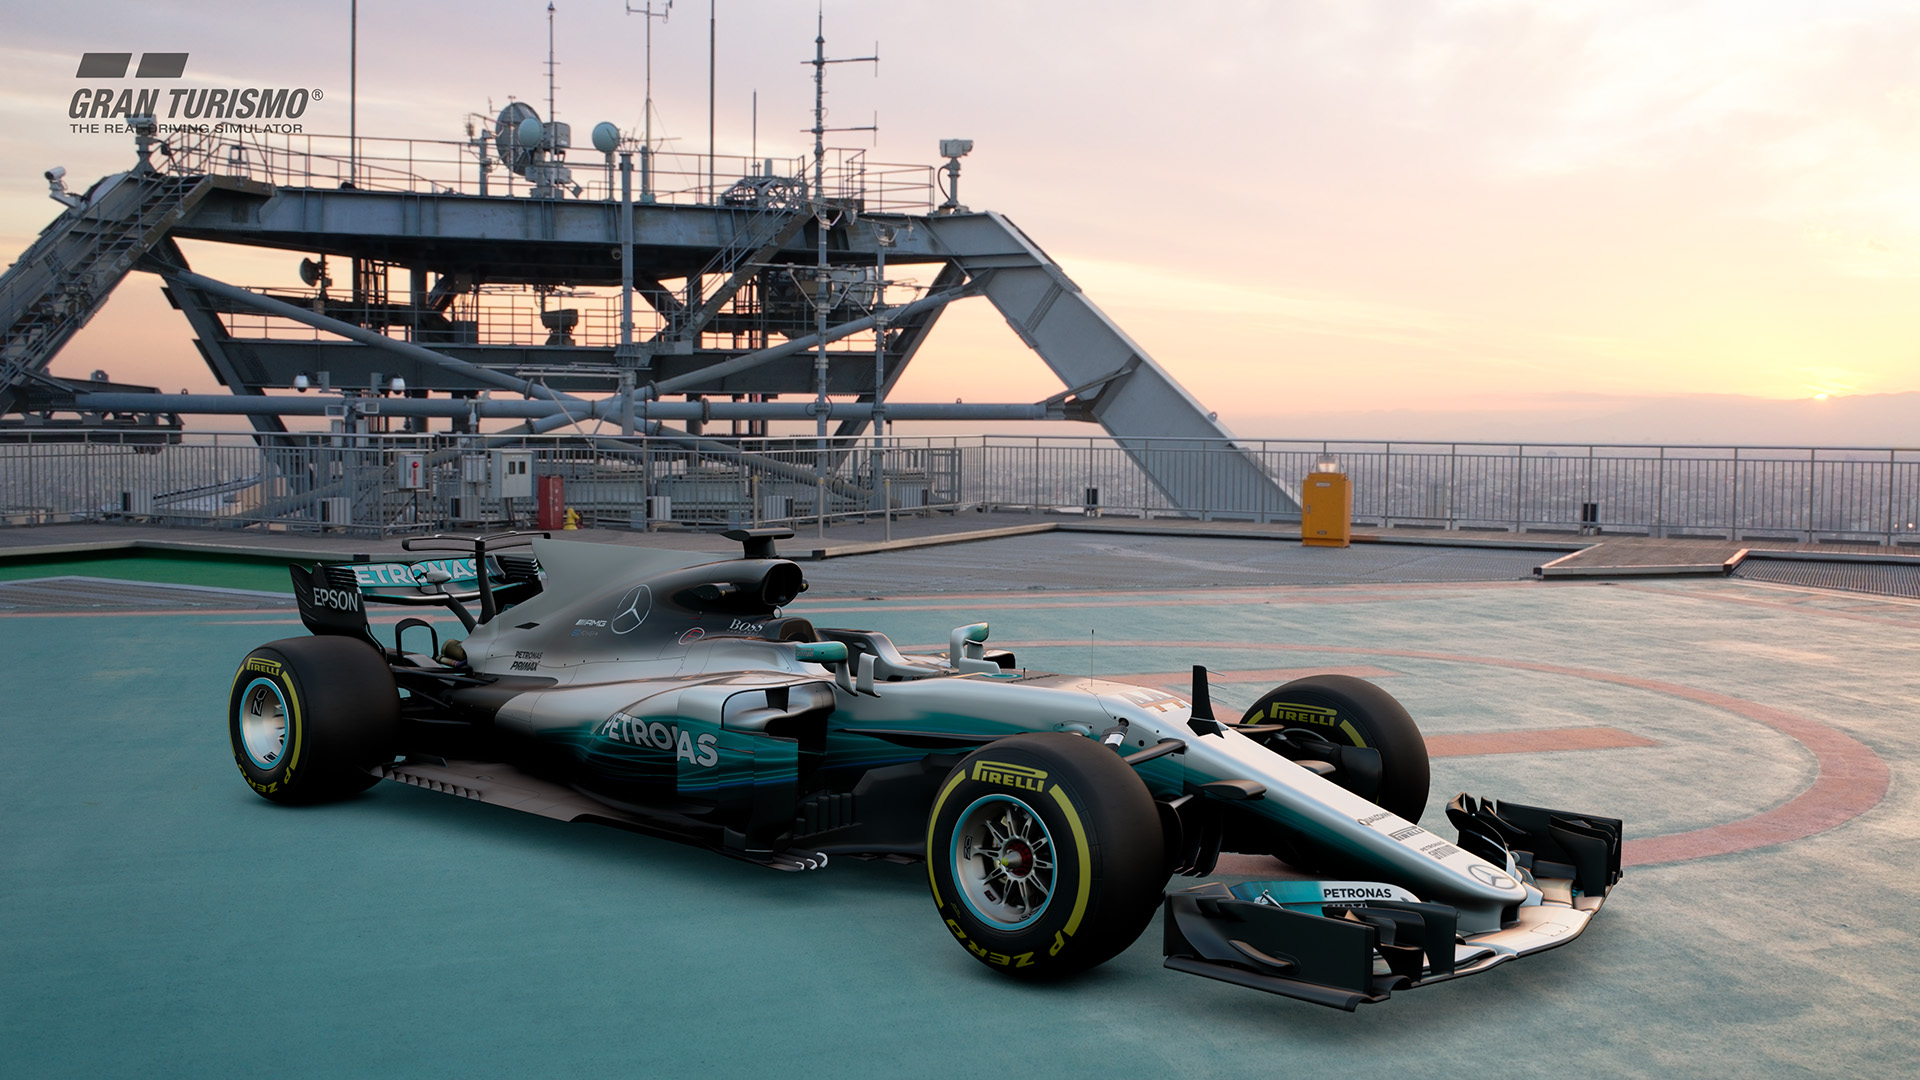 Introducing the "Gran Turismo Sport" July Update: The Mercedes F1 and a